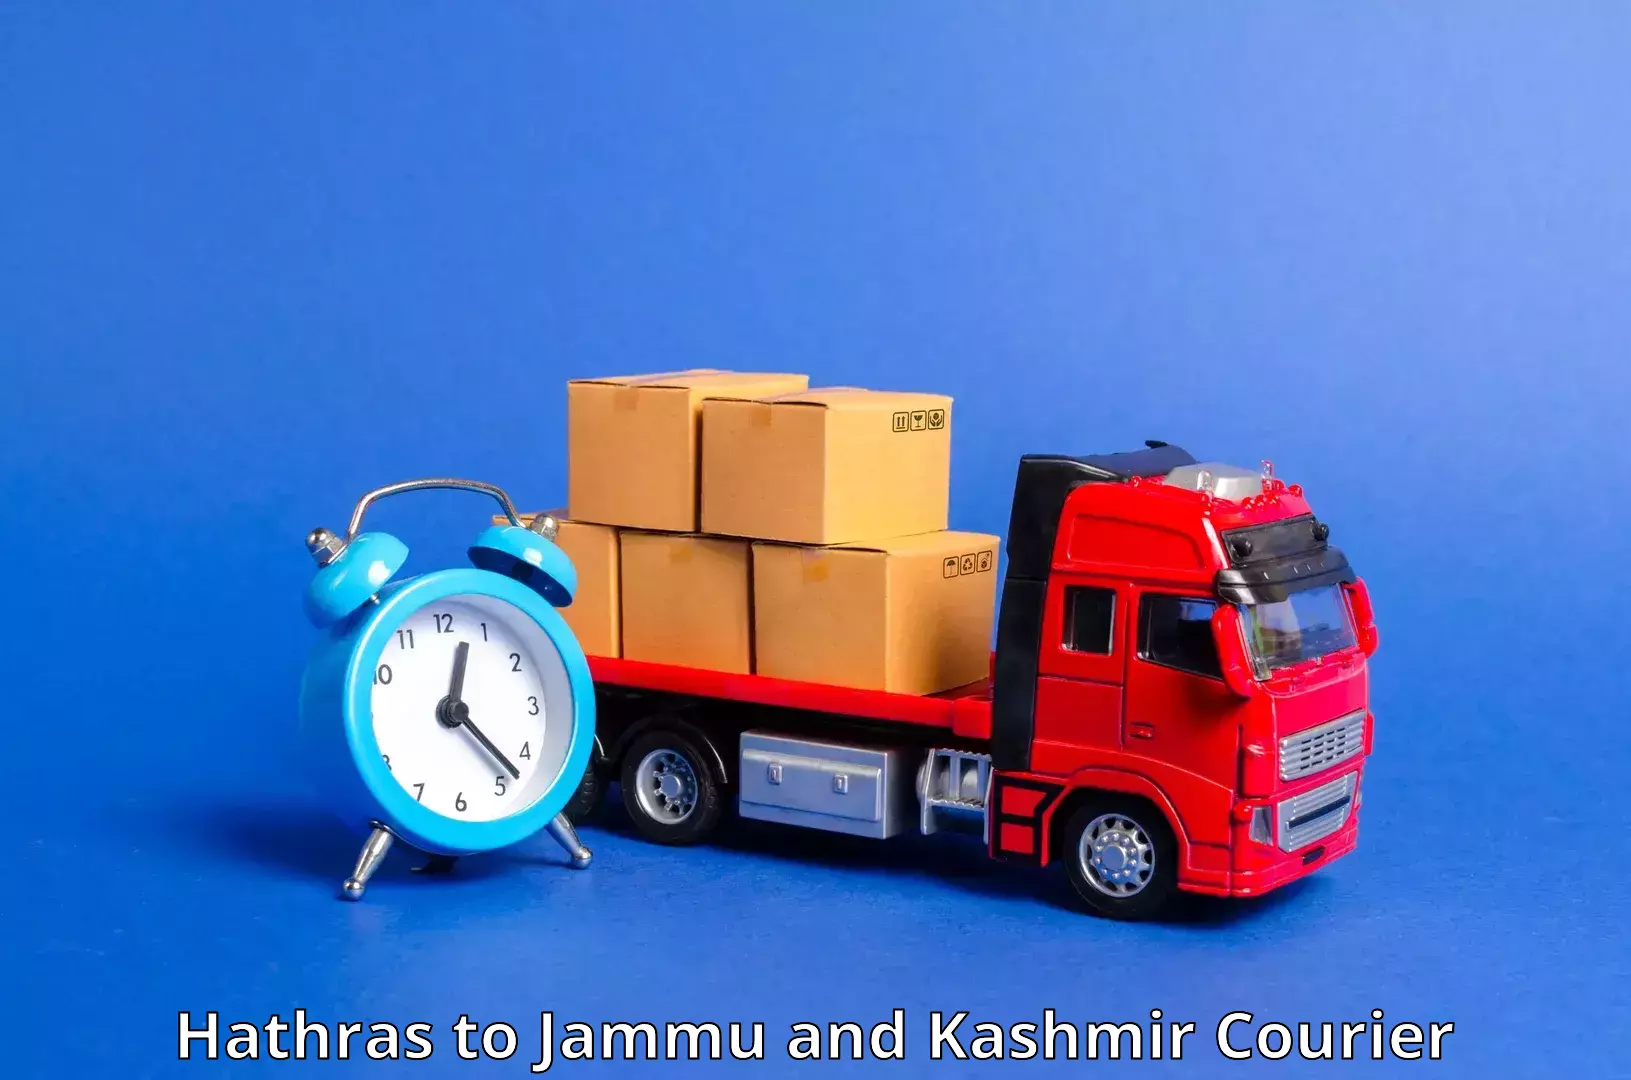 Package delivery network Hathras to Jammu